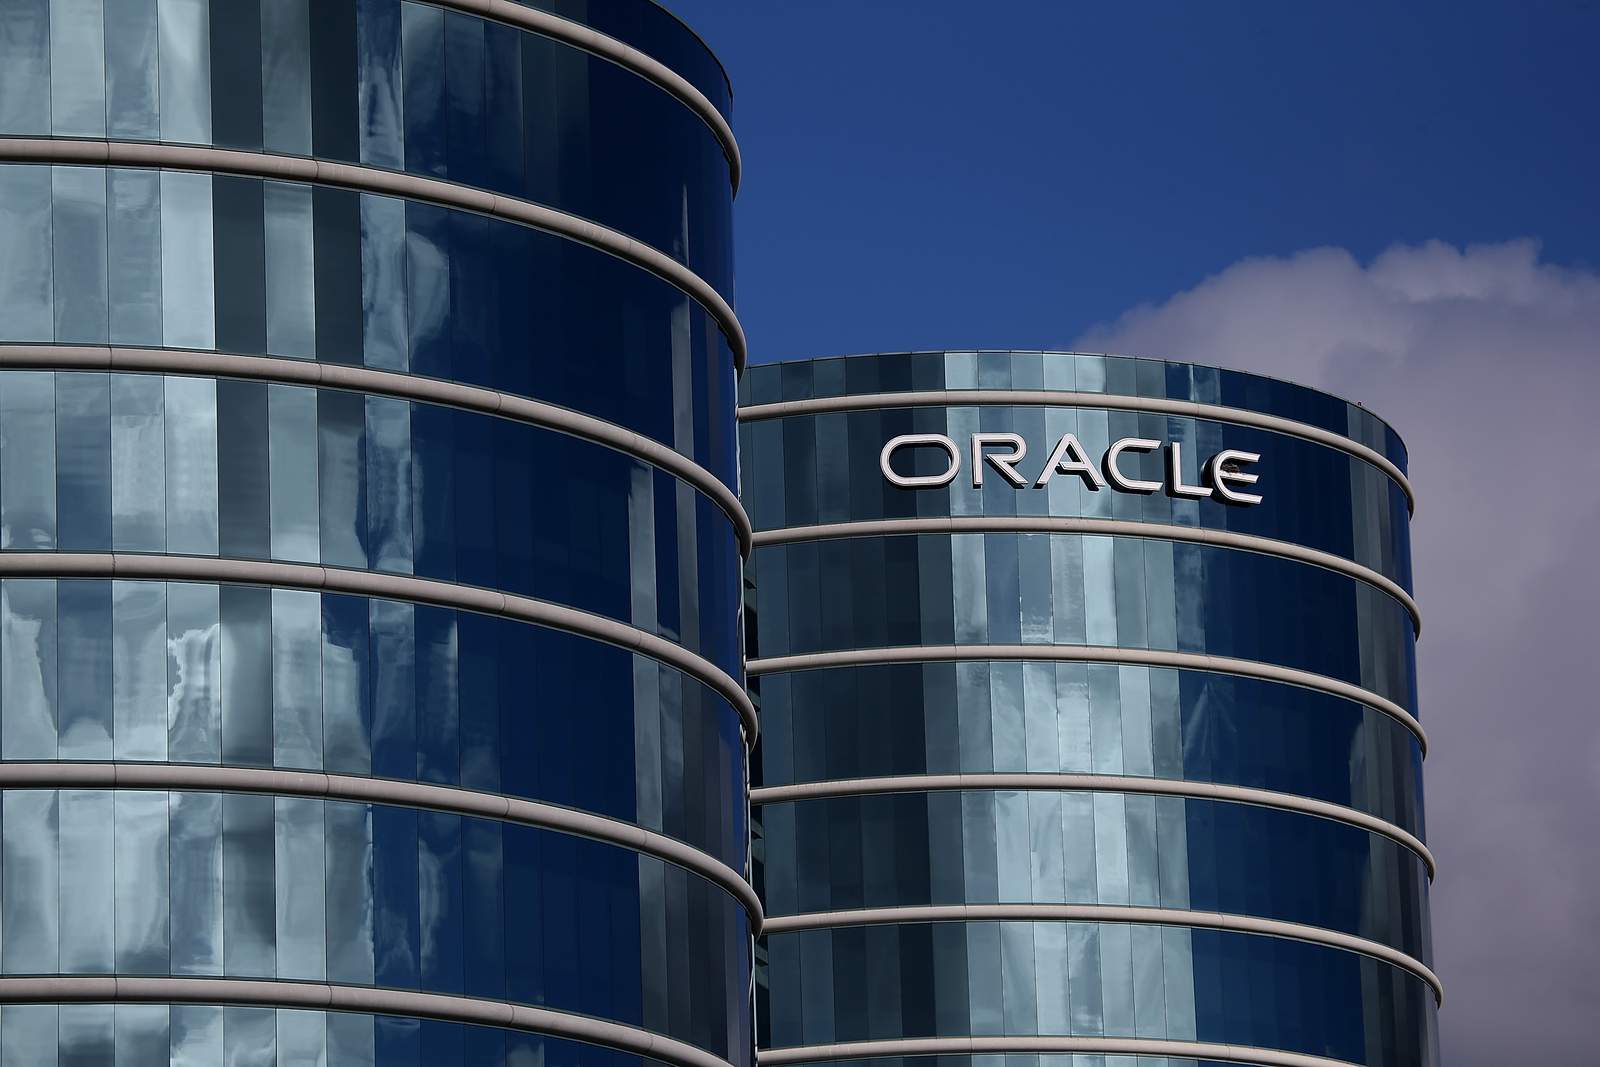 Software giant Oracle relocating its headquarters to Texas, governor says